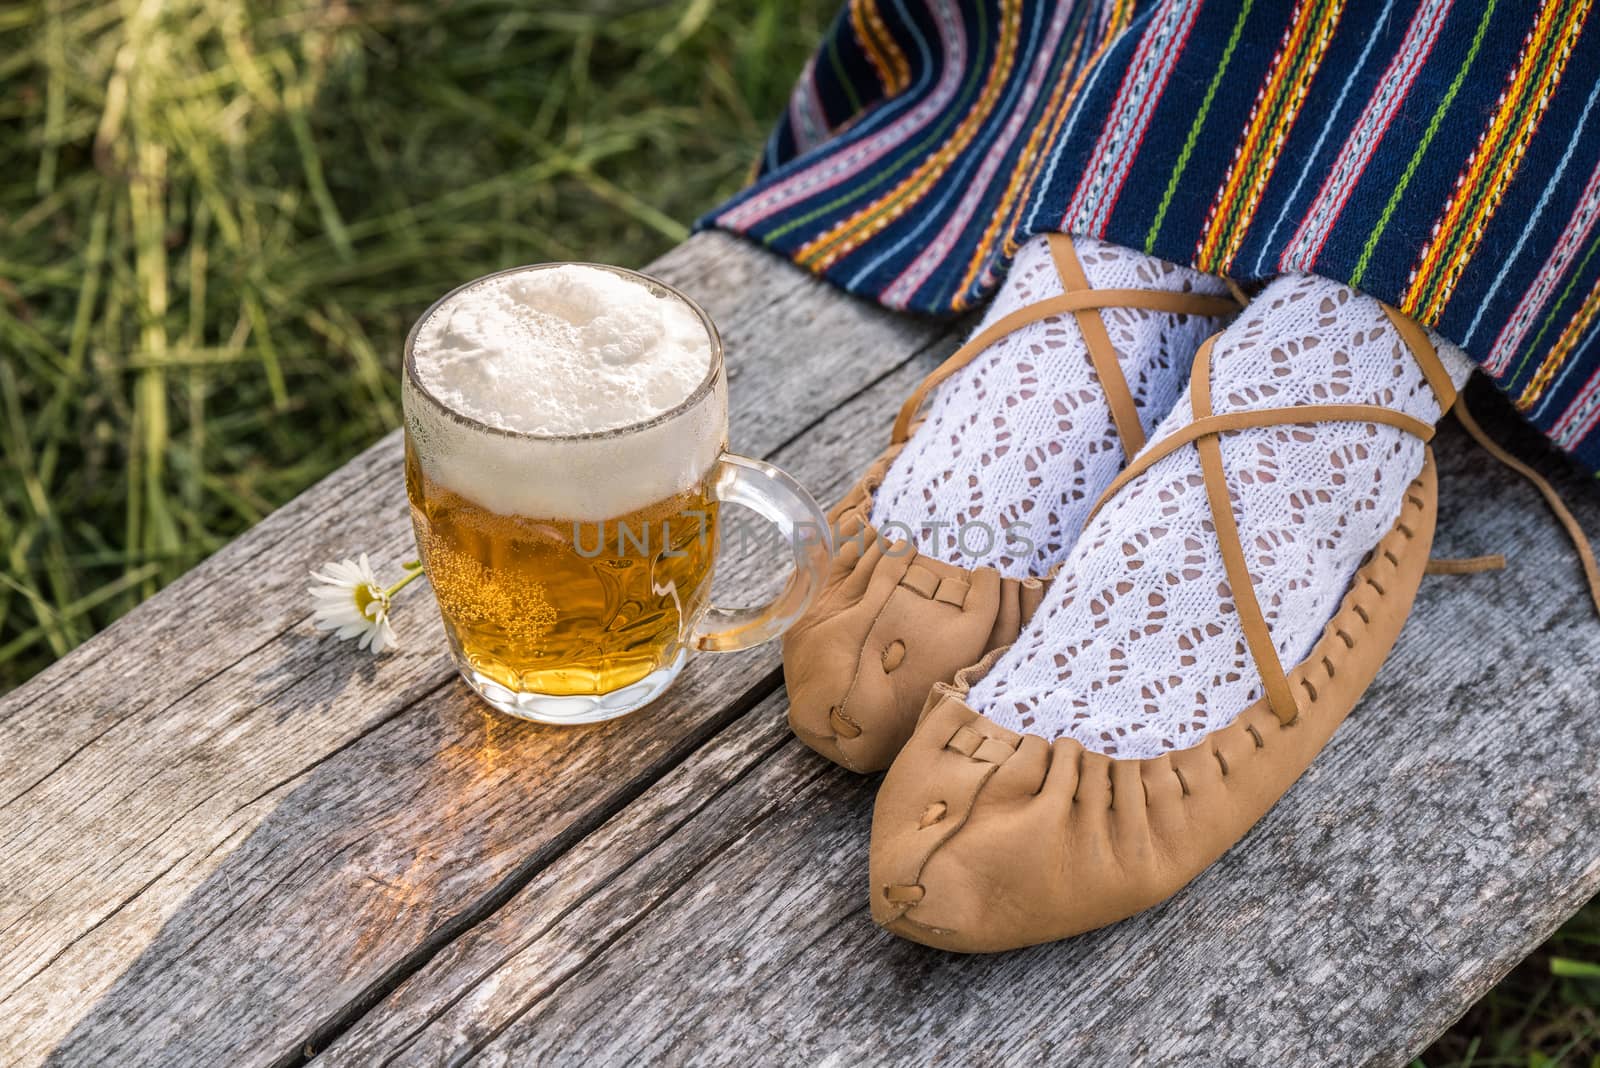 Glass of light beer and leather bast shoes of a Latvian woman in traditional clothing. Preparing Ligo festival. Riga. Latvia